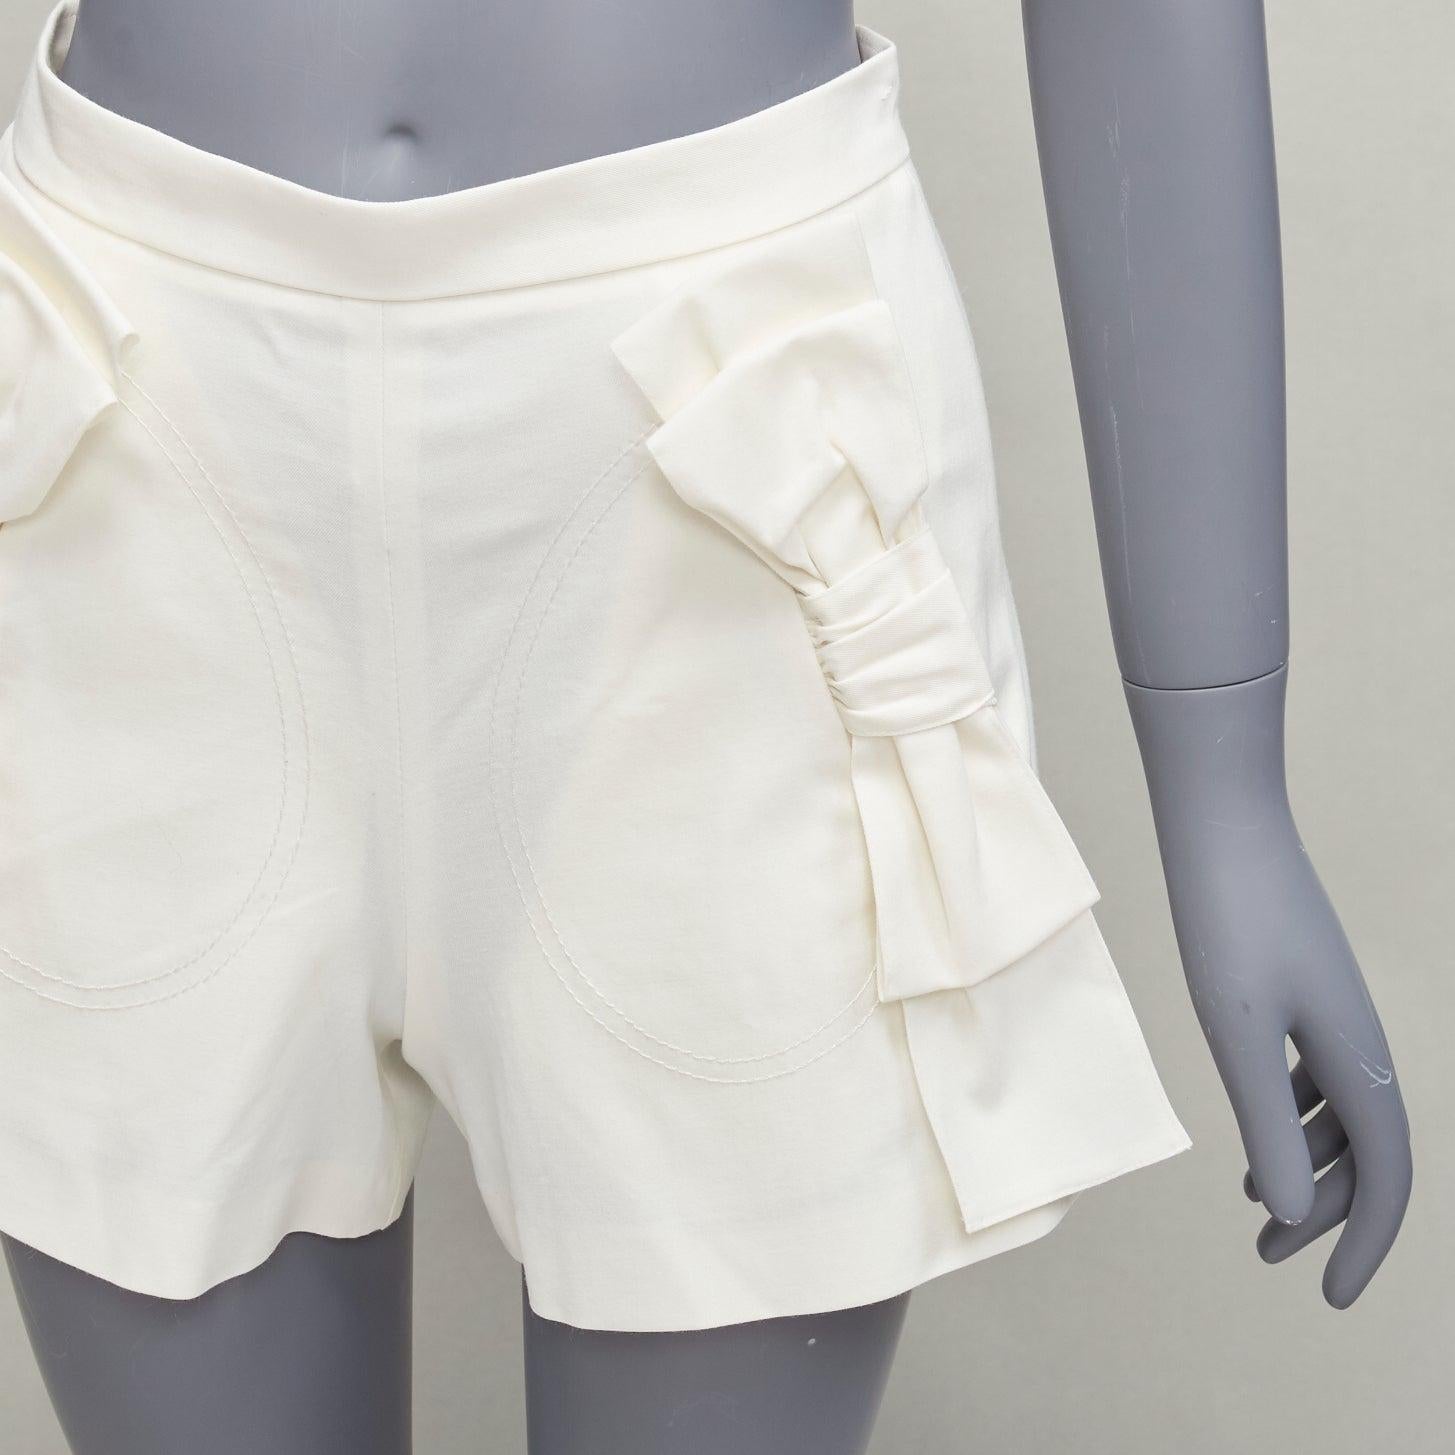 RED VALENTINO cream ribbon bow detail pockets wide shorts IT36 XXS
Reference: AAWC/A00863
Brand: Red Valentino
Material: Viscose, Virgin Wool, Blend
Color: Cream
Pattern: Solid
Closure: Zip
Extra Details: Zip back.
Made in: